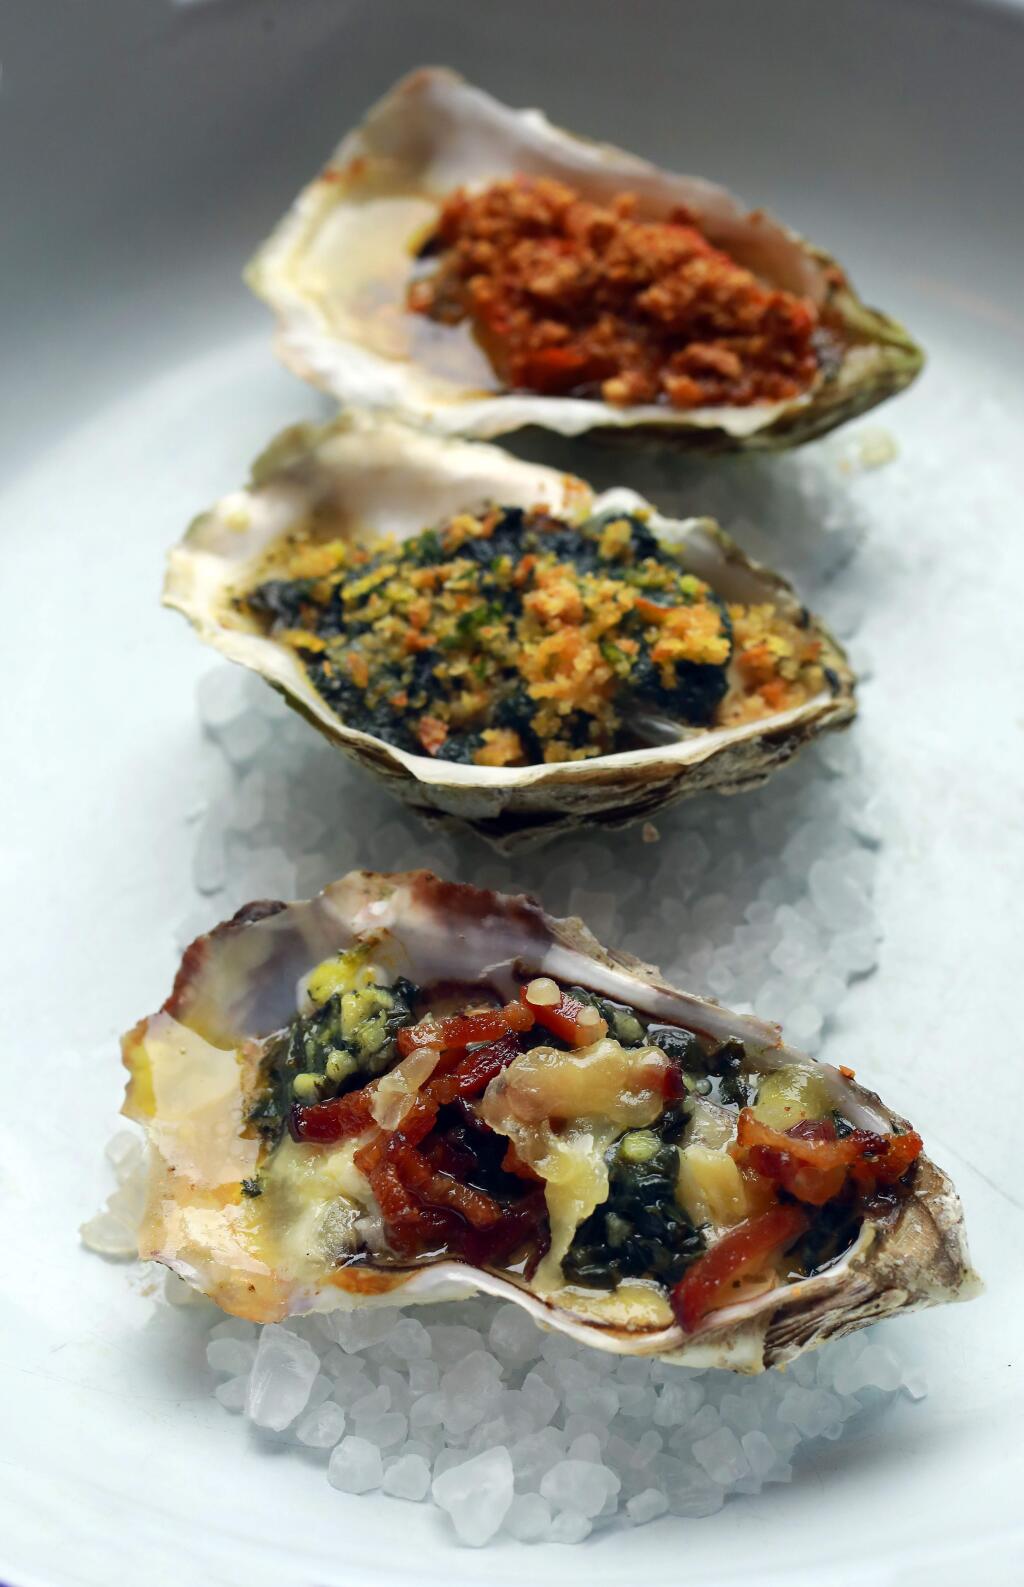 From bottom, the Handline grilled oyster menu includes: the 'Alta CA' with bacon, wilted greens, garlic, St. Jorge, the 'Hwy 1' topped with stinging nettle butter, lemon & parsley gremolata and the 'La Roja'includes mole, garlic butter and toasted almonds,. (John Burgess/The Press Democrat)